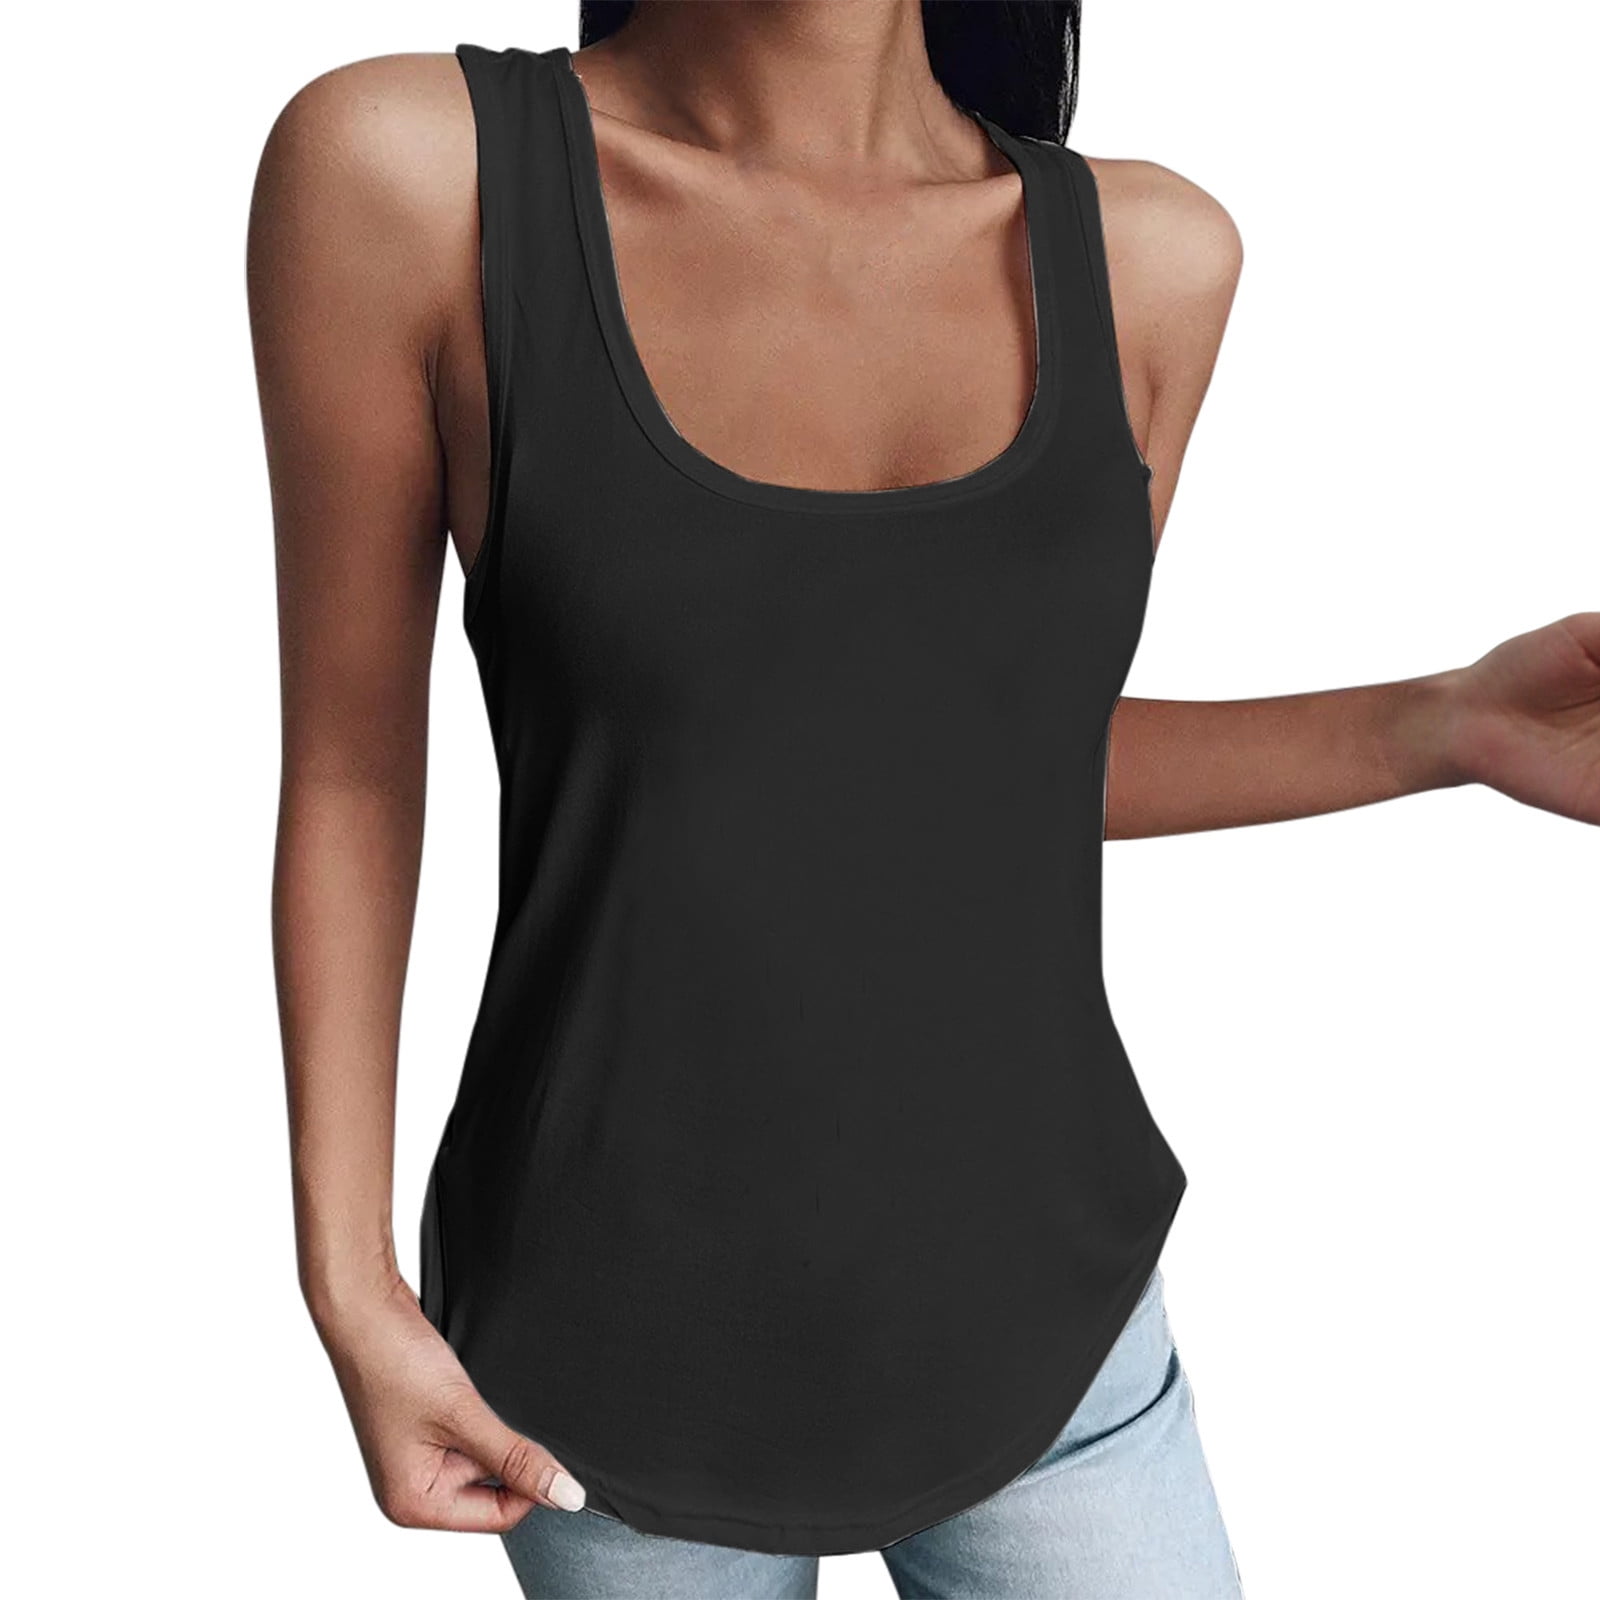 NKOOGH Pact Camisole With Shelf Bra 2 Tops Women Casual Daily Shirts  Sleeveless T Shirt U Neck Casual Tee Tops Tunic Blouse Vest Tanks 